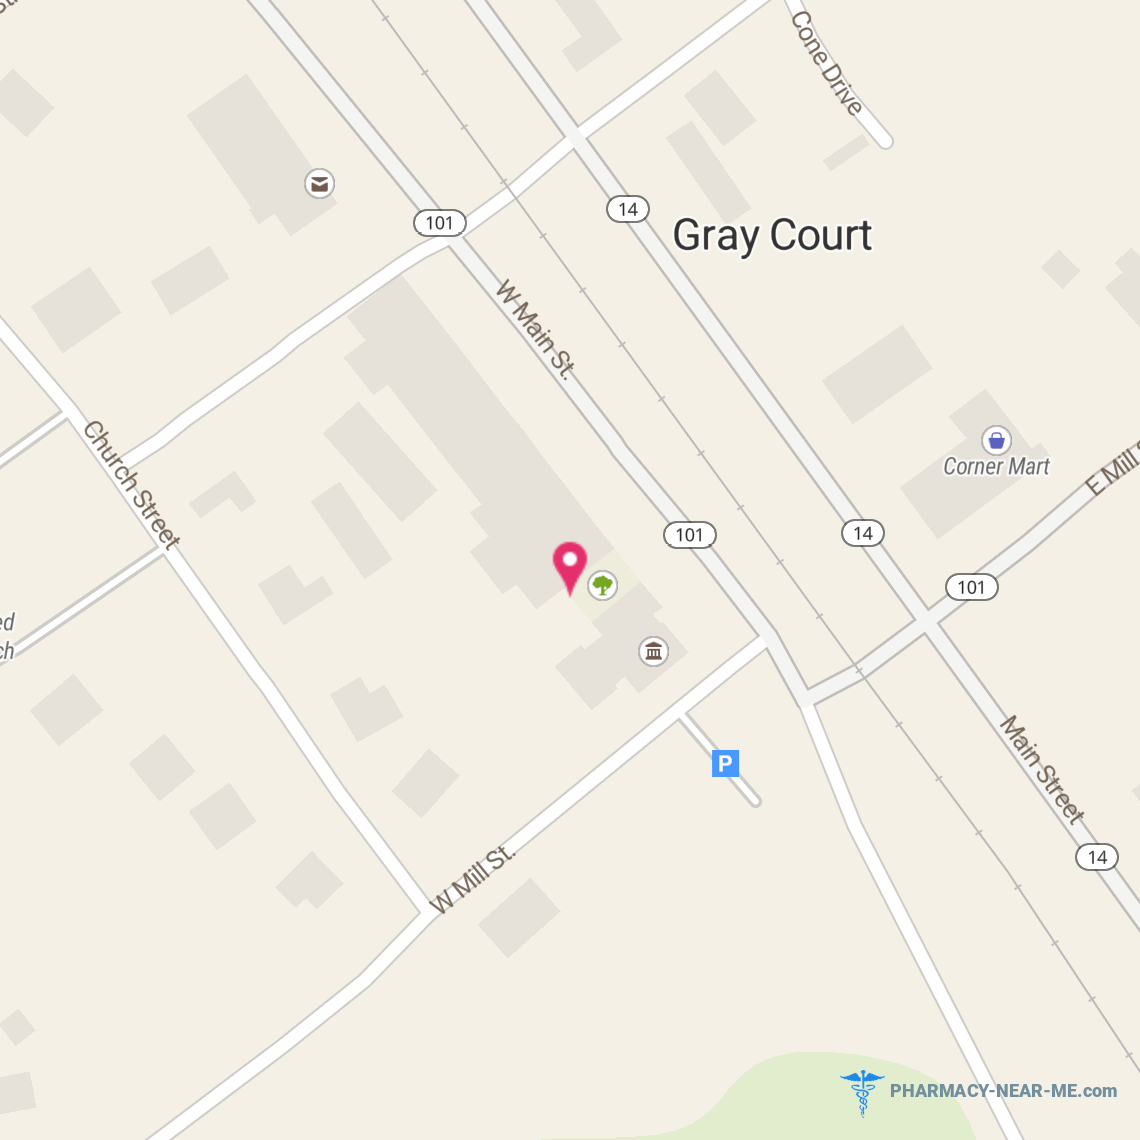 GRAY COURT PHARMACY - Pharmacy Hours, Phone, Reviews & Information: 345 West Main Street, Gray Court, South Carolina 29645, United States